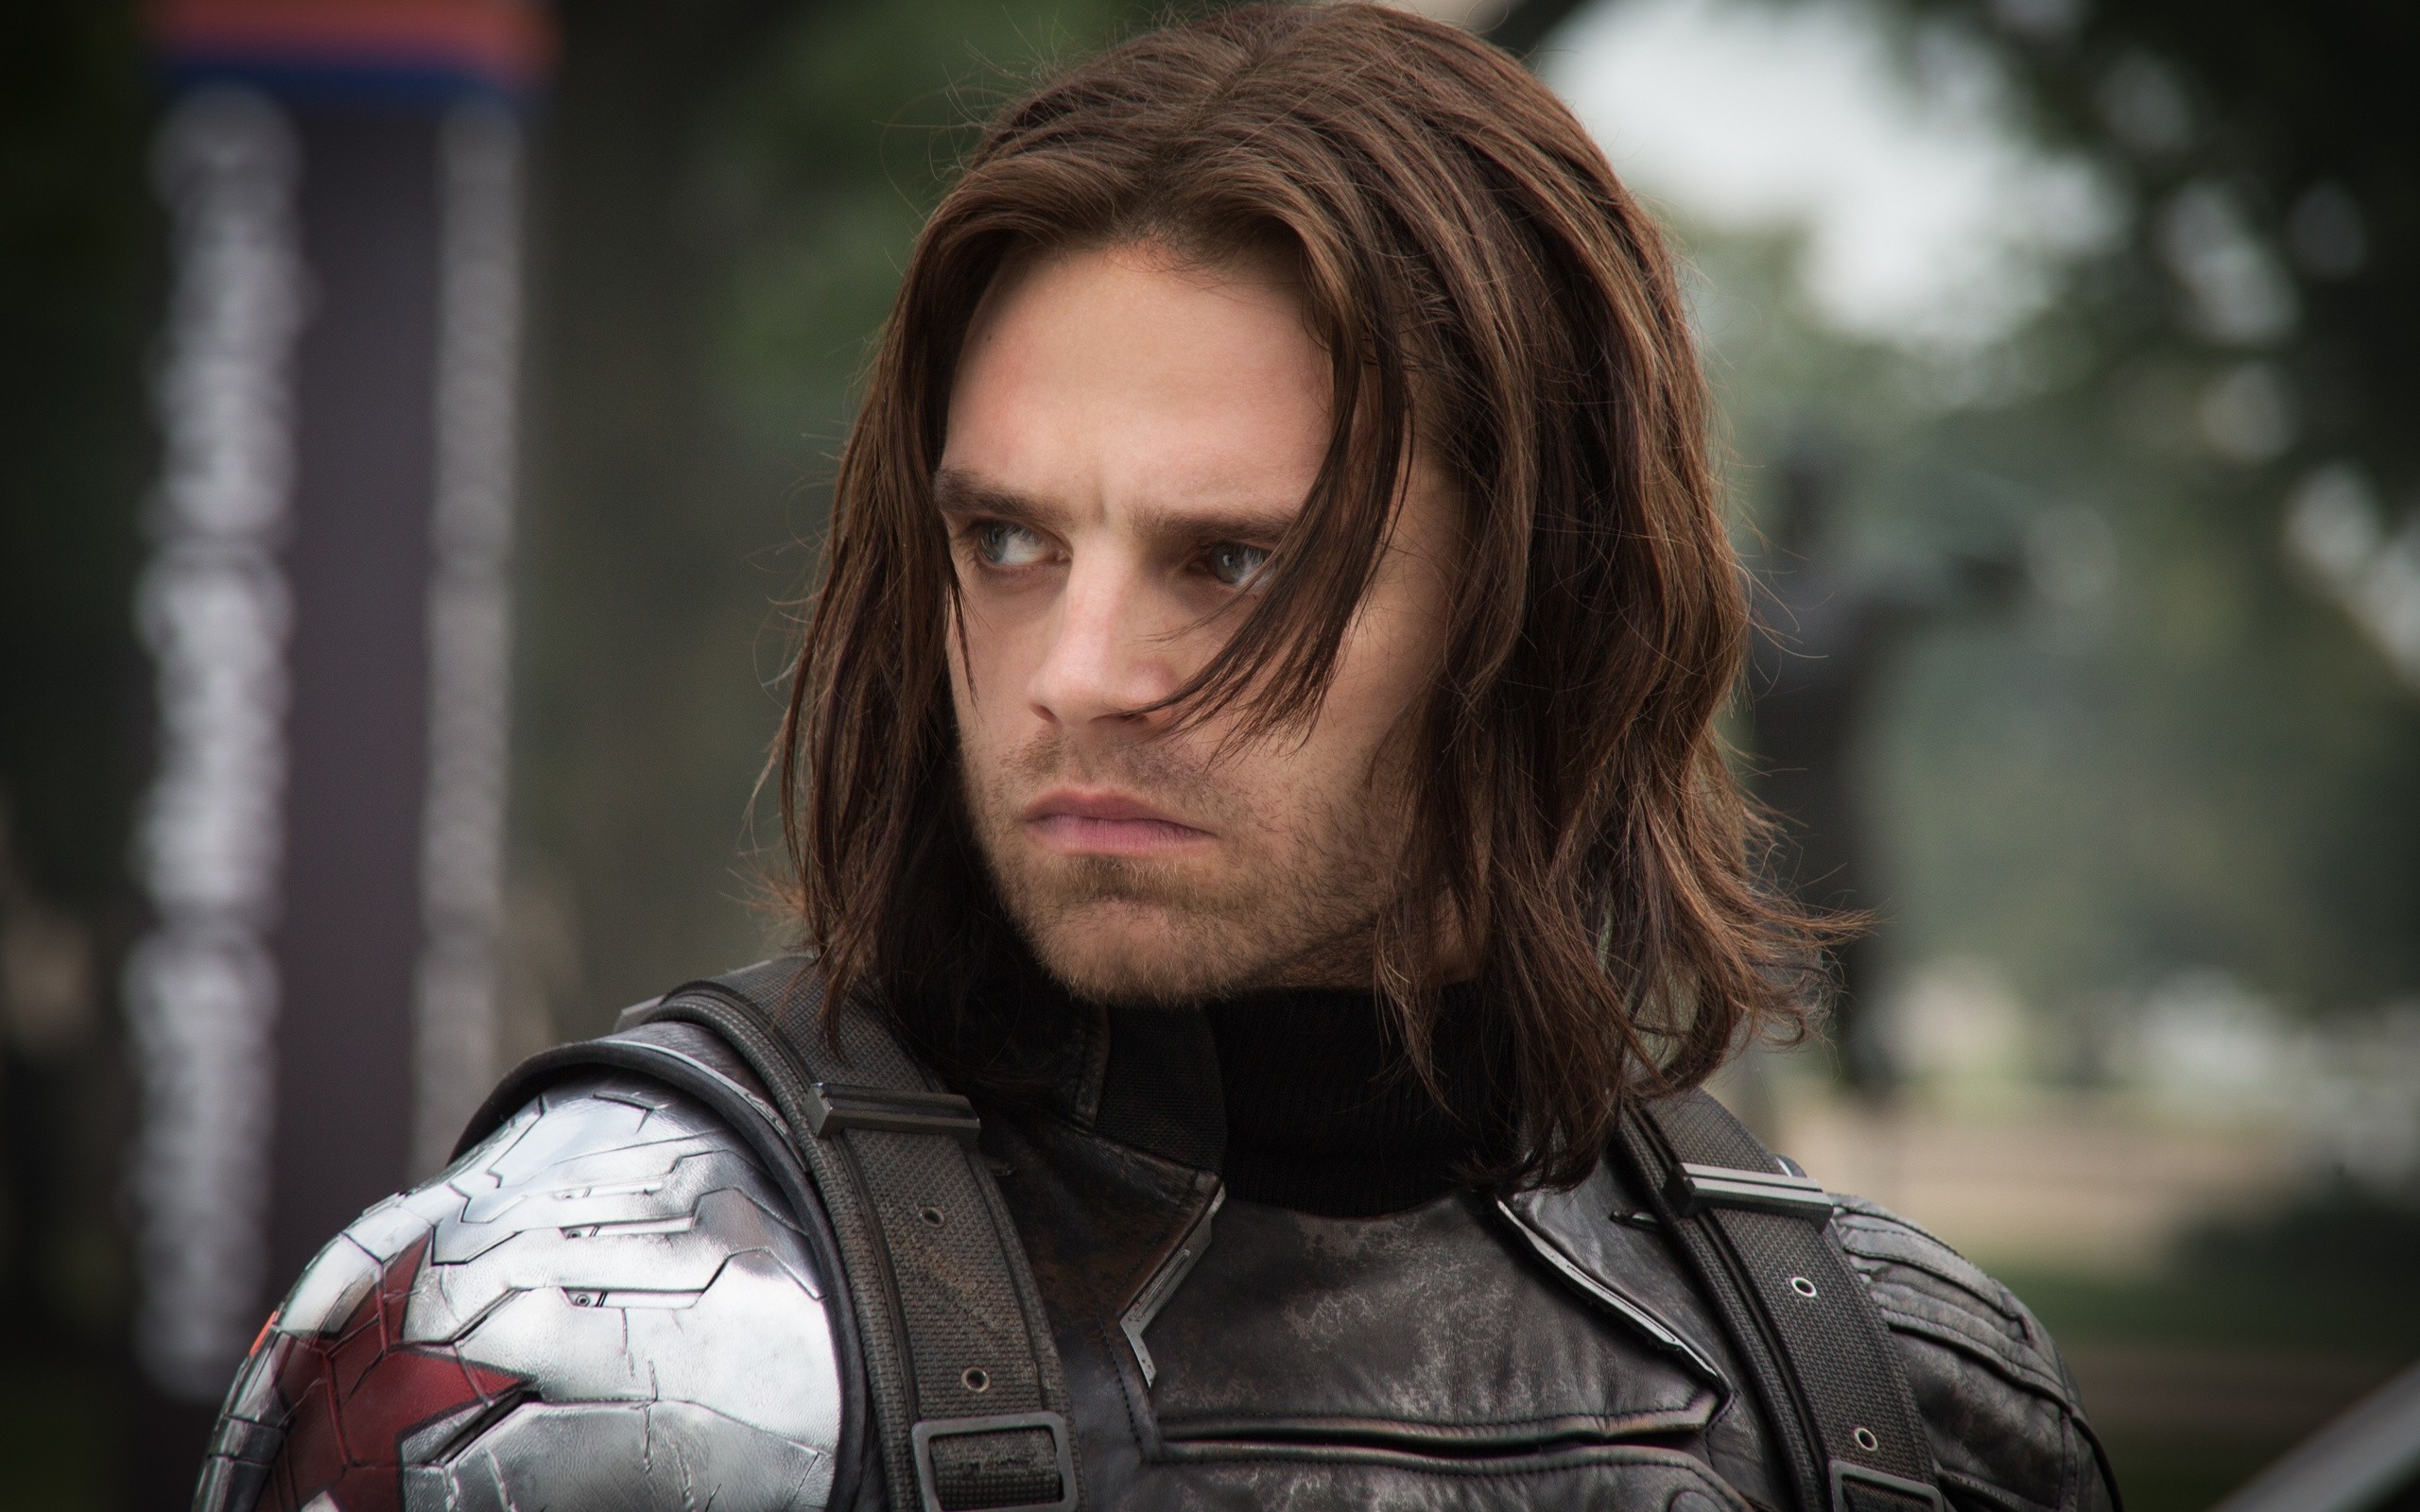 How many assassinations has The Winter Soldier committed in the last 50 years?